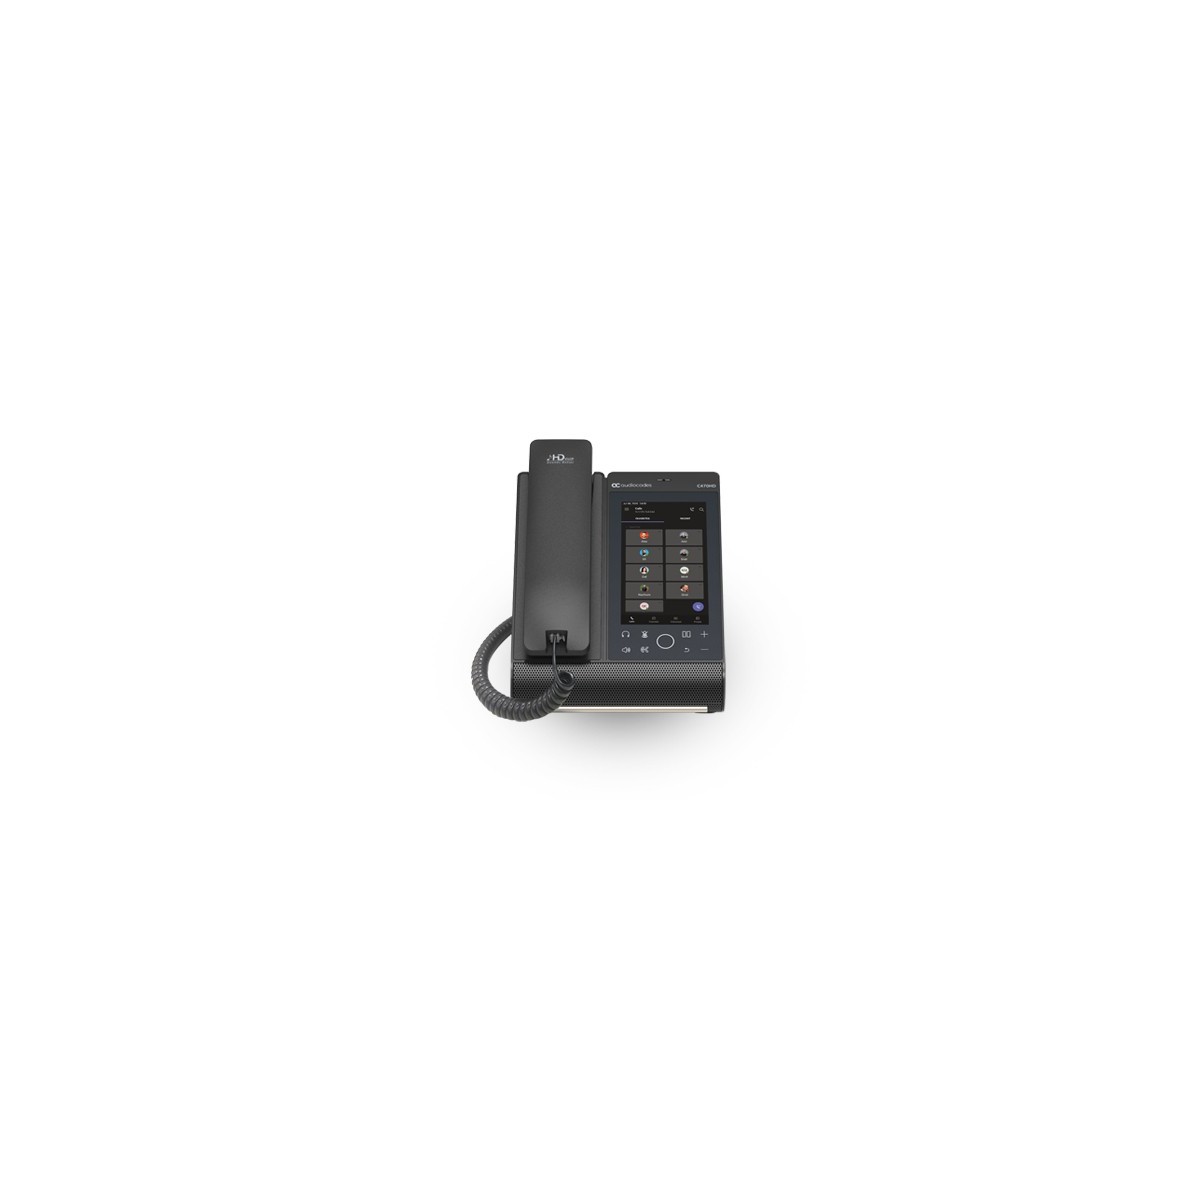 AudioCodes Teams C470HD Total Touch IP-Phone PoE GbE with integrated BT Dual Band WiFi and an - VoIP-Telefon - TCP-IP